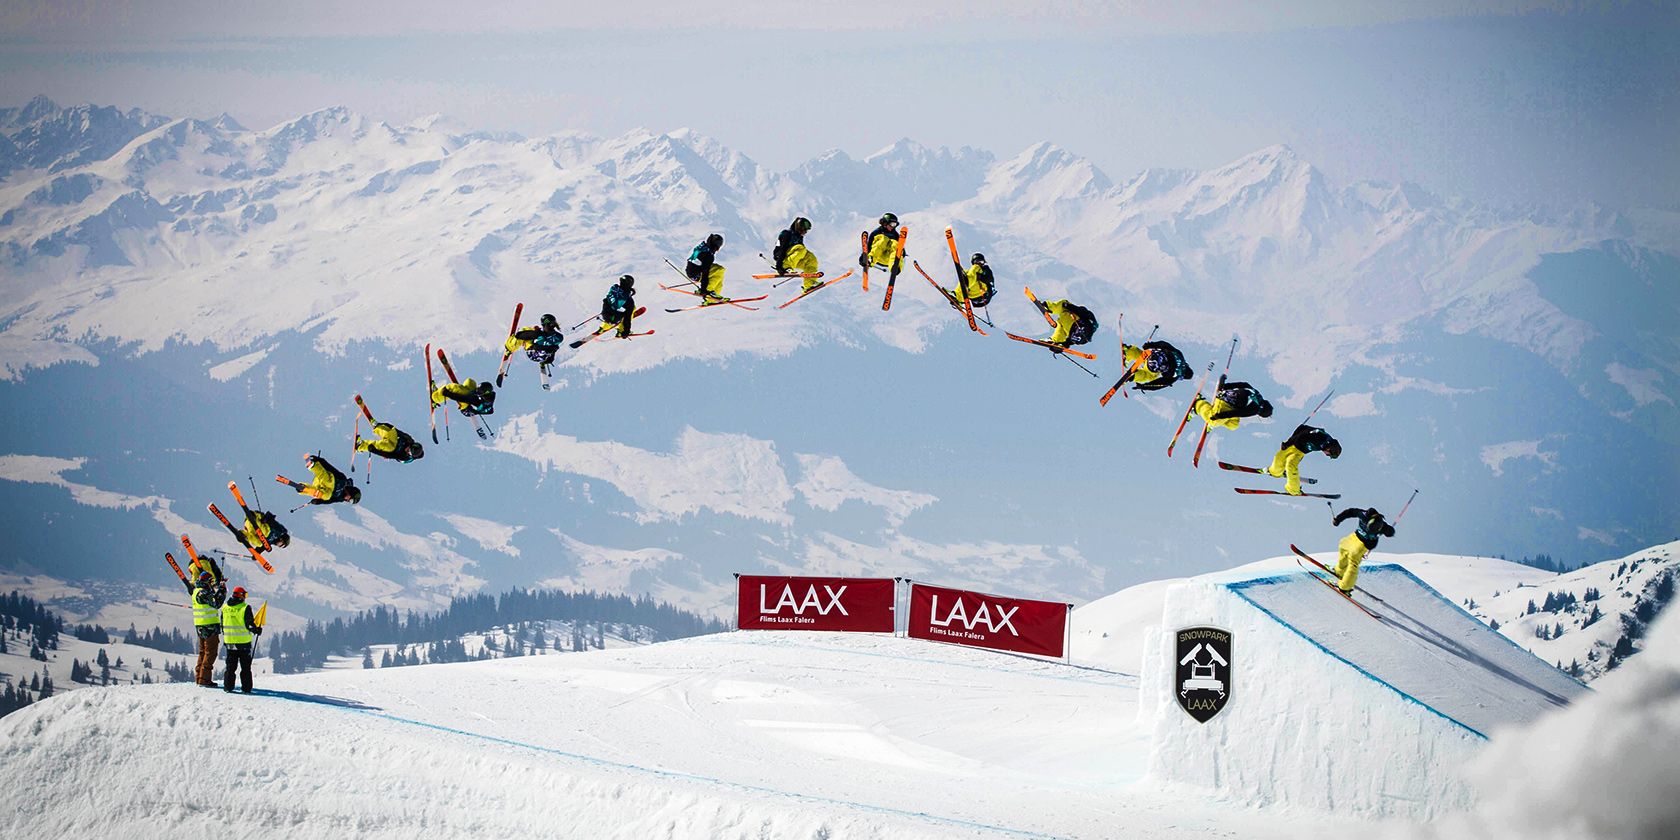 Multiplicity photo of skier